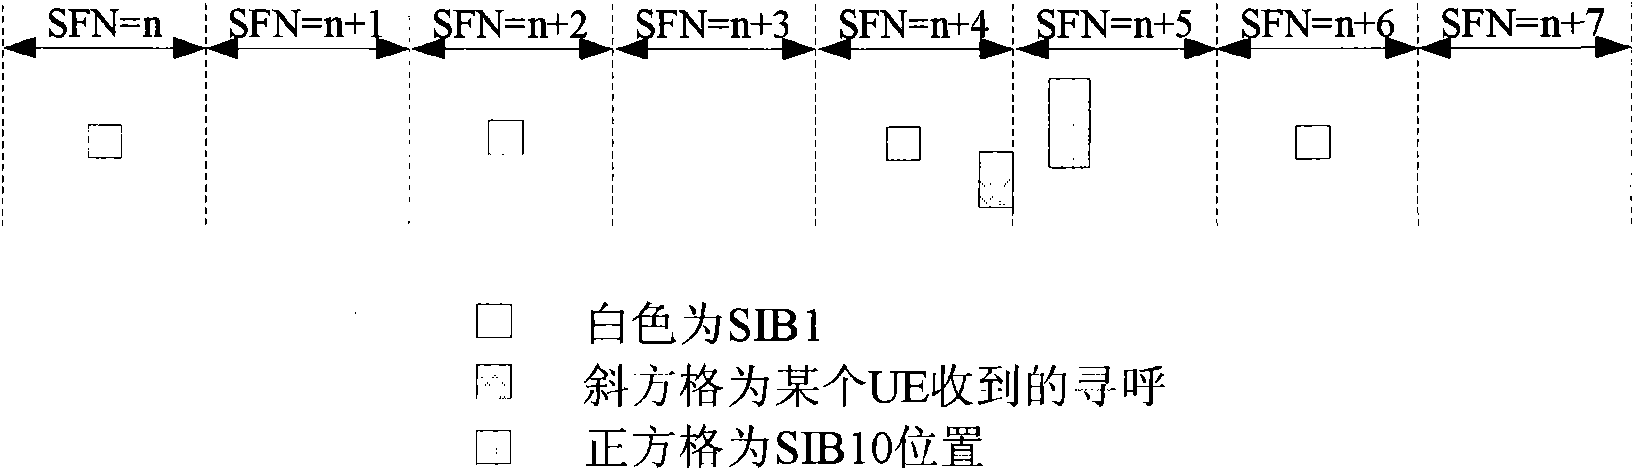 System message receiving and transmitting method of earthquake and tsunami warning system